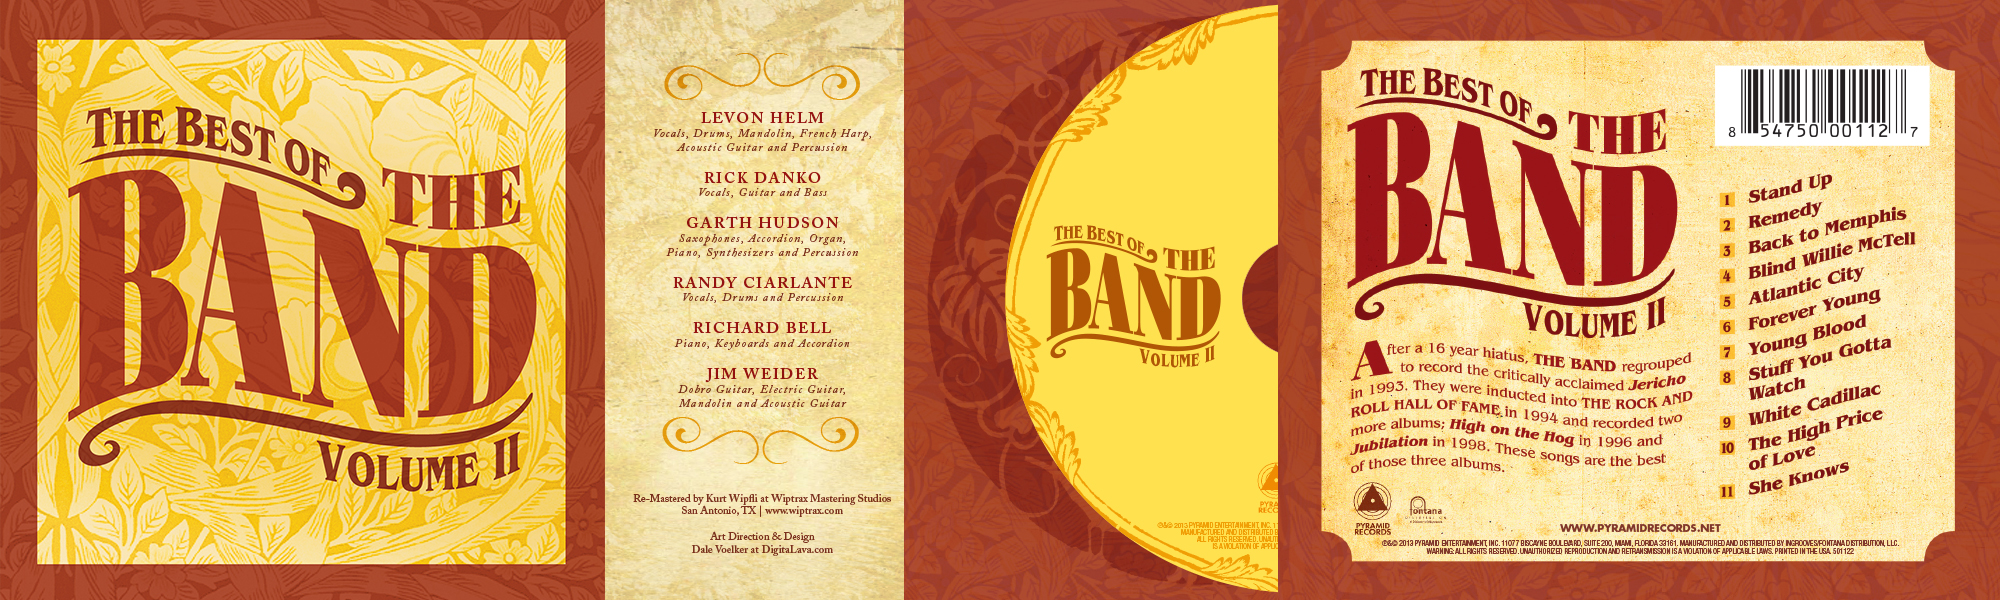 the-band-image